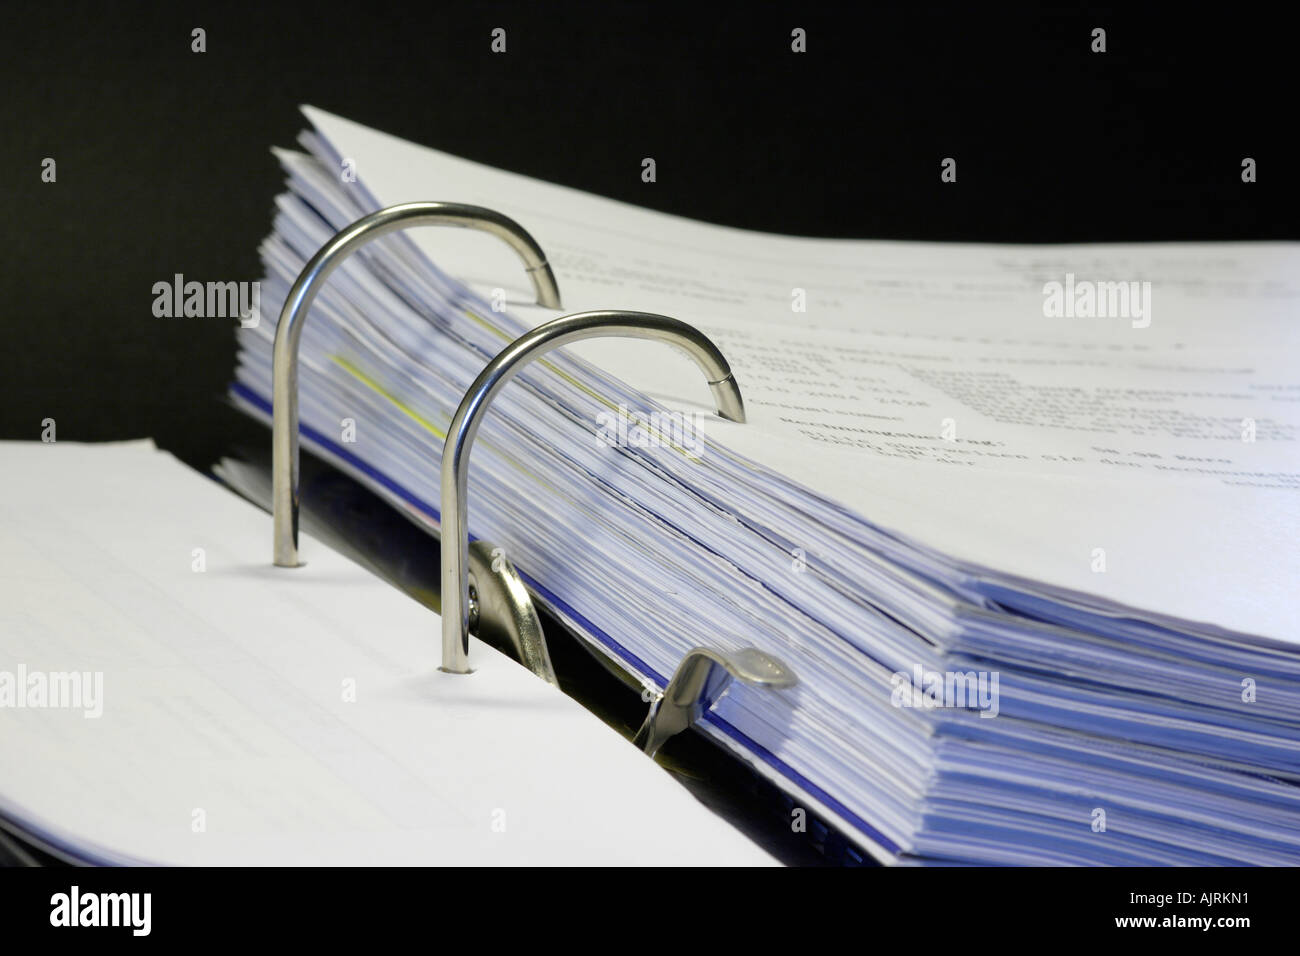 Open binder with different documents on black background Stock Photo